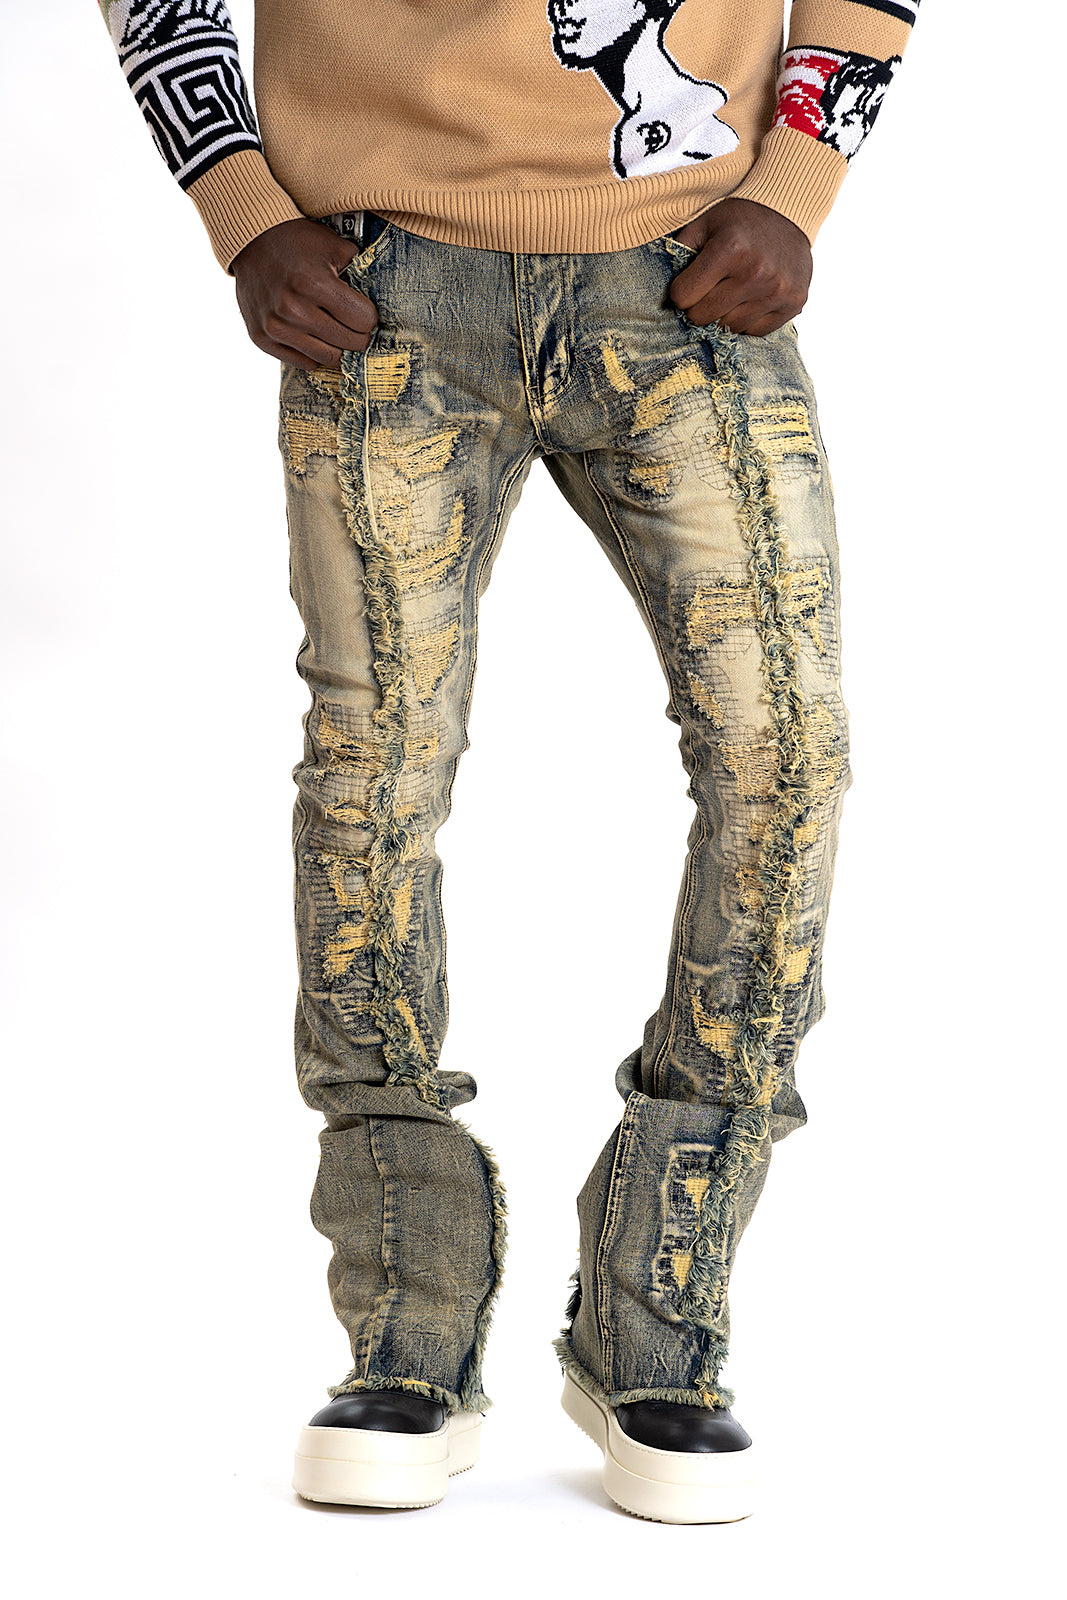 F1774 Cashay Prime Stacked Jeans - Dirt